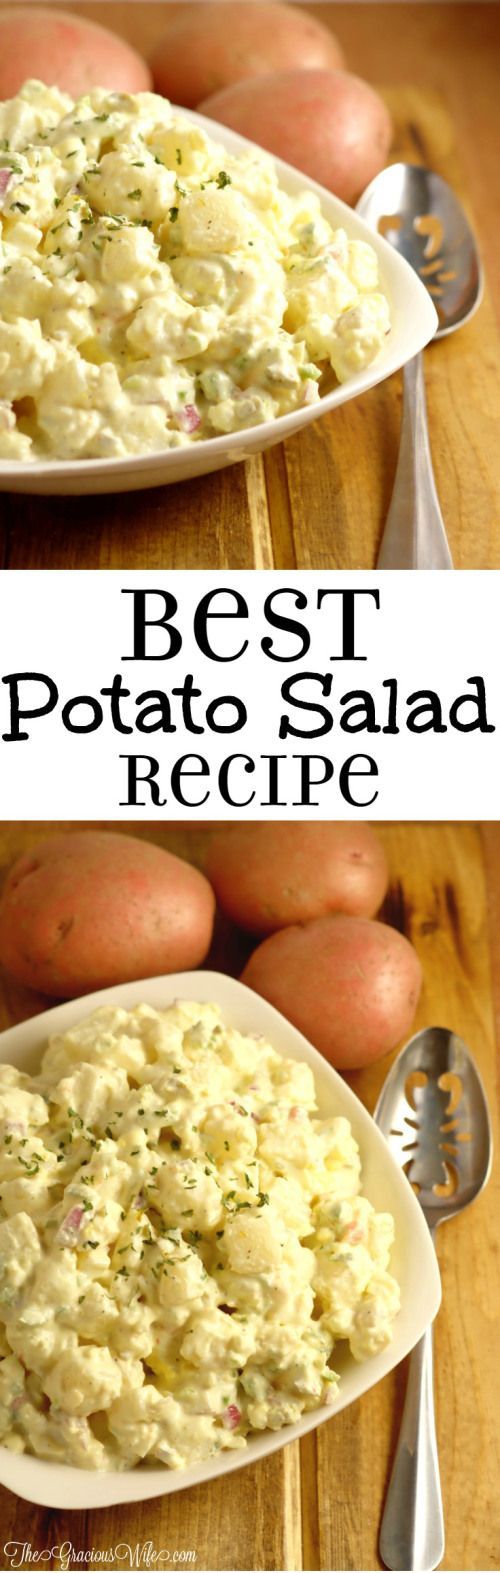 Best Potato Salad Recipe – Easy classic southern potato salad recipe. I never like potato salad until I tried this recipe.  Its